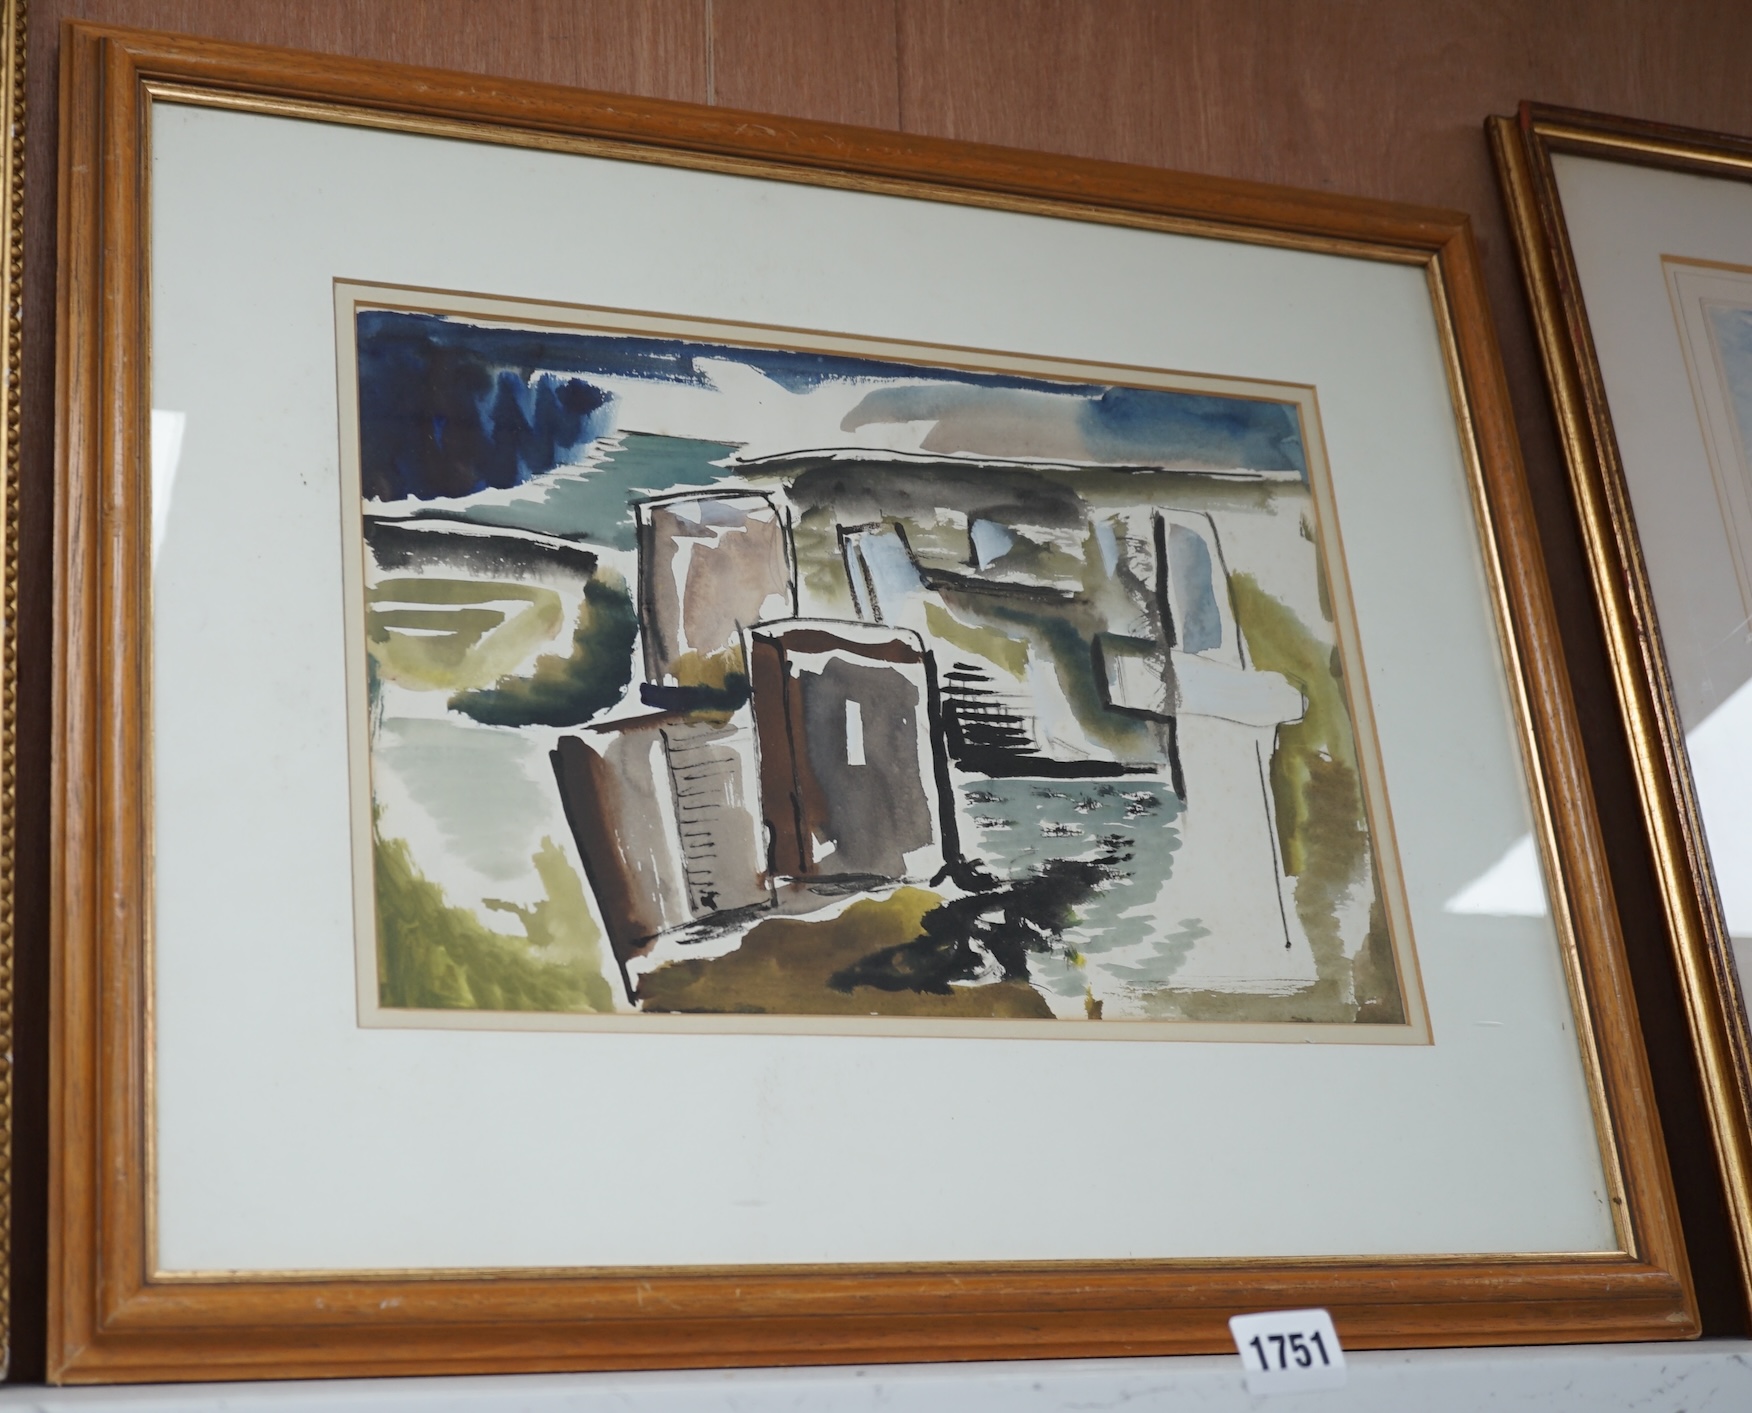 Anthony Brown (1906-1987), watercolour, Dorset landscape, The Simon Carter Gallery receipt and label verso, 25 x 37cm. Condition - good